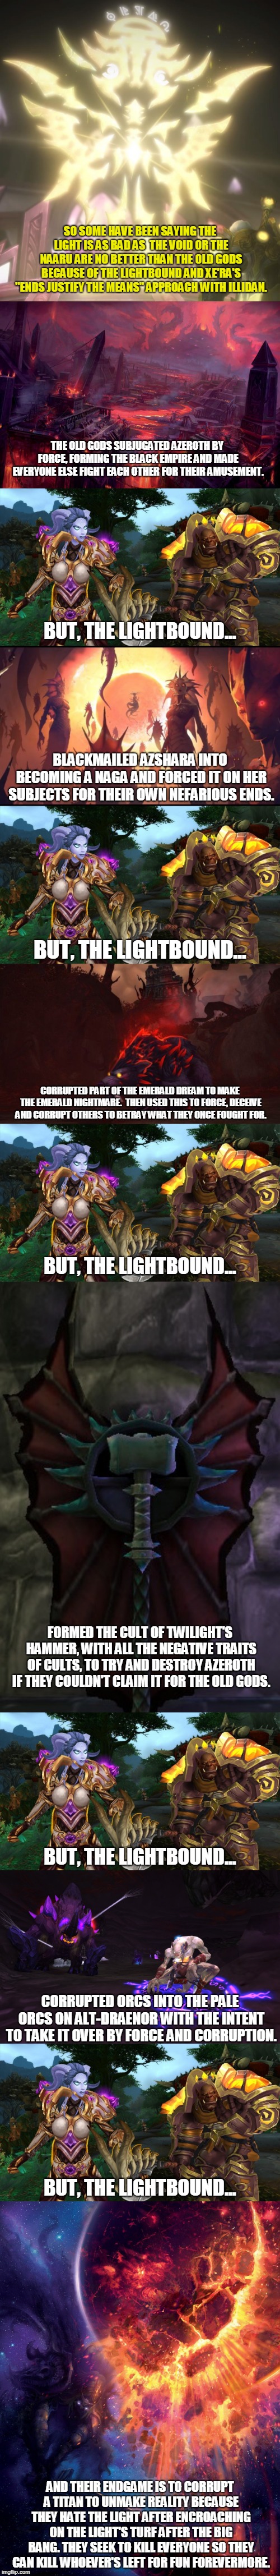 Warcraft: Light vs Void | SO SOME HAVE BEEN SAYING THE LIGHT IS AS BAD AS  THE VOID OR THE NAARU ARE NO BETTER THAN THE OLD GODS BECAUSE OF THE LIGHTBOUND AND XE'RA'S "ENDS JUSTIFY THE MEANS" APPROACH WITH ILLIDAN. THE OLD GODS SUBJUGATED AZEROTH BY FORCE, FORMING THE BLACK EMPIRE AND MADE EVERYONE ELSE FIGHT EACH OTHER FOR THEIR AMUSEMENT. BUT, THE LIGHTBOUND... BLACKMAILED AZSHARA INTO BECOMING A NAGA AND FORCED IT ON HER SUBJECTS FOR THEIR OWN NEFARIOUS ENDS. BUT, THE LIGHTBOUND... CORRUPTED PART OF THE EMERALD DREAM TO MAKE THE EMERALD NIGHTMARE.  THEN USED THIS TO FORCE, DECEIVE AND CORRUPT OTHERS TO BETRAY WHAT THEY ONCE FOUGHT FOR. BUT, THE LIGHTBOUND... FORMED THE CULT OF TWILIGHT'S HAMMER, WITH ALL THE NEGATIVE TRAITS OF CULTS, TO TRY AND DESTROY AZEROTH IF THEY COULDN'T CLAIM IT FOR THE OLD GODS. BUT, THE LIGHTBOUND... CORRUPTED ORCS INTO THE PALE ORCS ON ALT-DRAENOR WITH THE INTENT TO TAKE IT OVER BY FORCE AND CORRUPTION. BUT, THE LIGHTBOUND... AND THEIR ENDGAME IS TO CORRUPT A TITAN TO UNMAKE REALITY BECAUSE THEY HATE THE LIGHT AFTER ENCROACHING ON THE LIGHT'S TURF AFTER THE BIG BANG. THEY SEEK TO KILL EVERYONE SO THEY CAN KILL WHOEVER'S LEFT FOR FUN FOREVERMORE. | image tagged in memes,world of warcraft,double standards,morality,history of the world | made w/ Imgflip meme maker